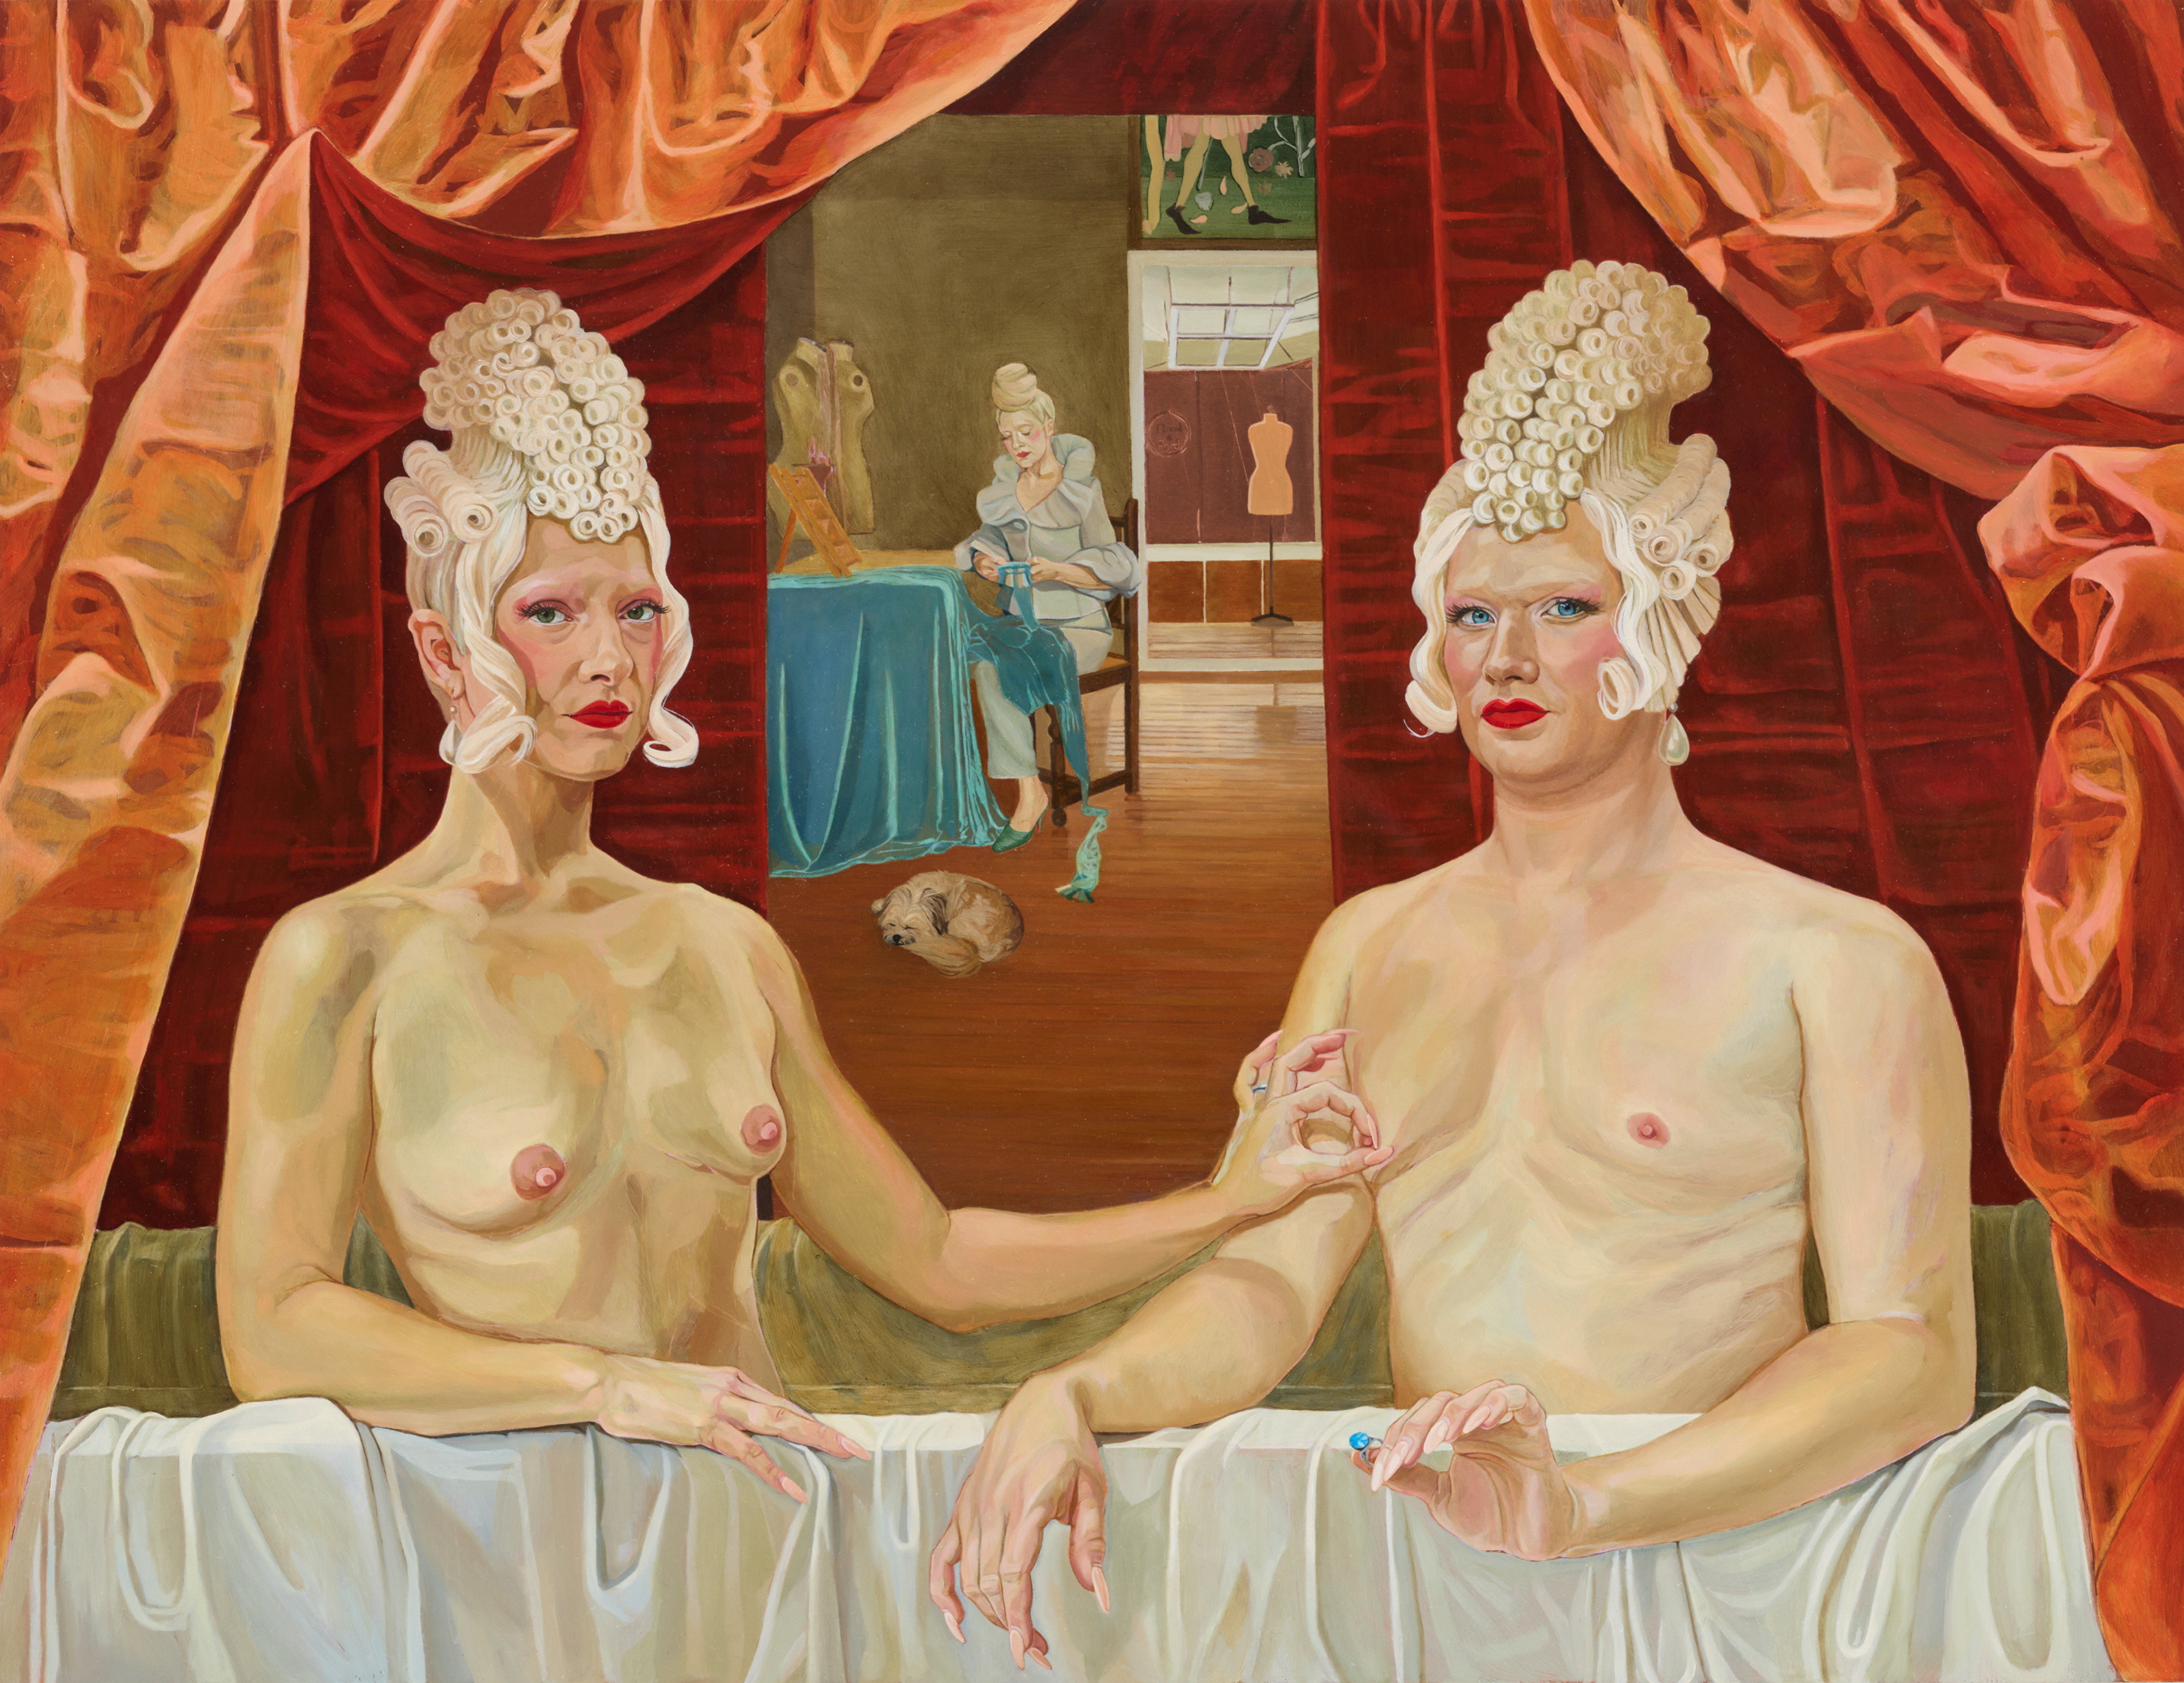 A portrait of Katie-Louise and Lilian Nicol-Ford, a cis white woman and a trans white woman, topless and wearing white wigs.